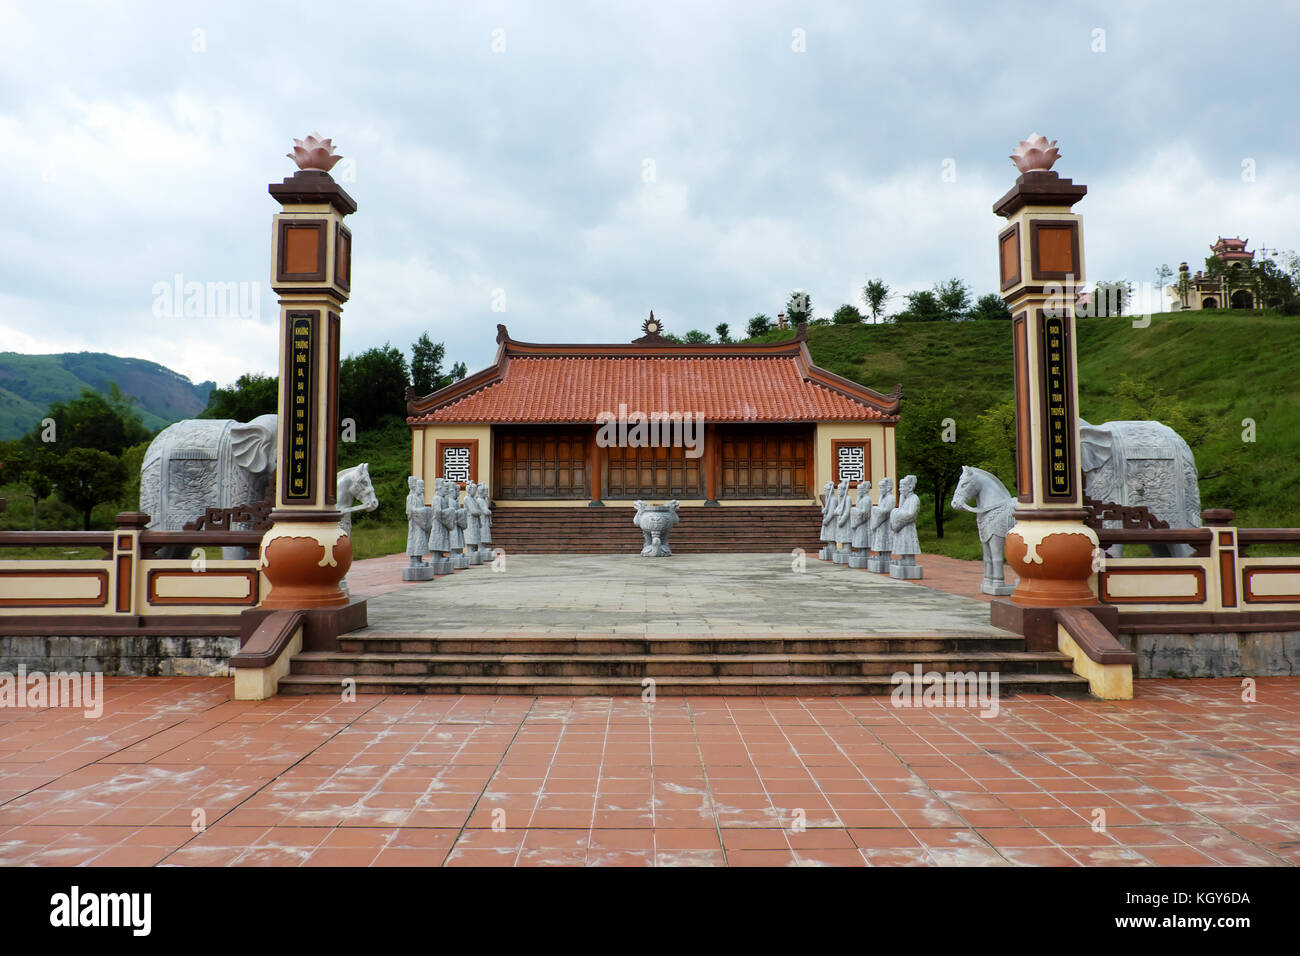 BINH DINH, VIET NAM, Historical place at Tay Son inherent in Nguyen Hue hero, temple on An mountain top for sacrifices heaven and earth Stock Photo